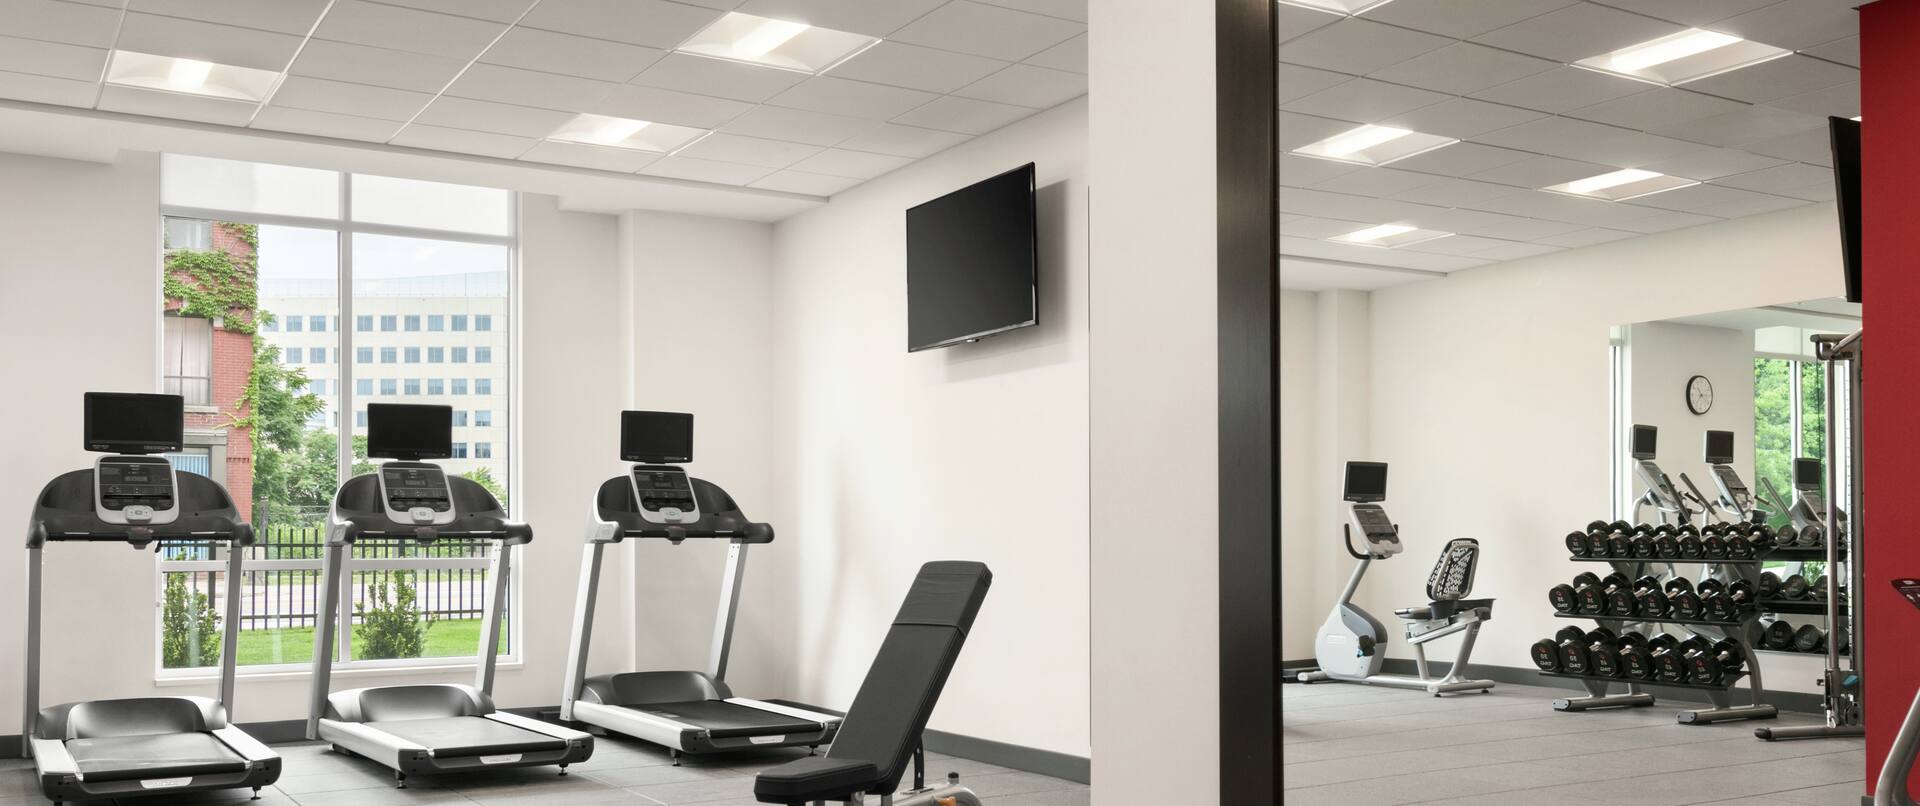 Fitness Center with Mirrored Wall, Treadmills and TV